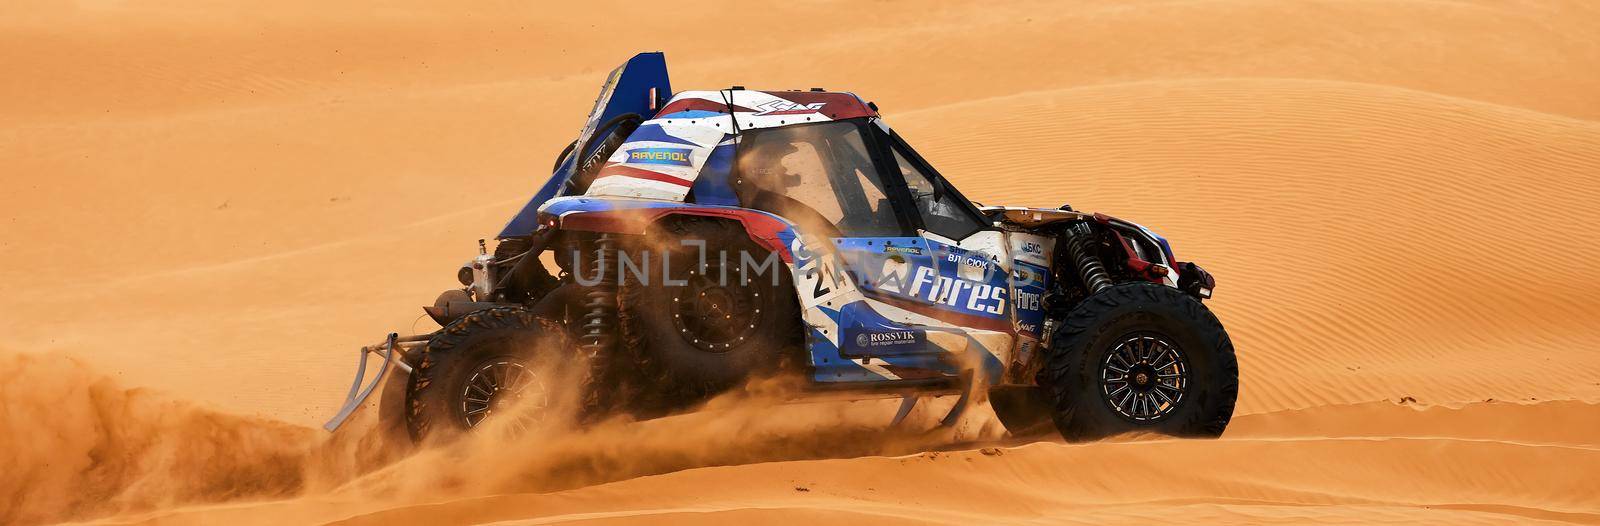 Sports car gets over the difficult part of the route during the Rally raid THE GOLD OF KAGAN-2021. 26.04.2021 Astrakhan, Russia.